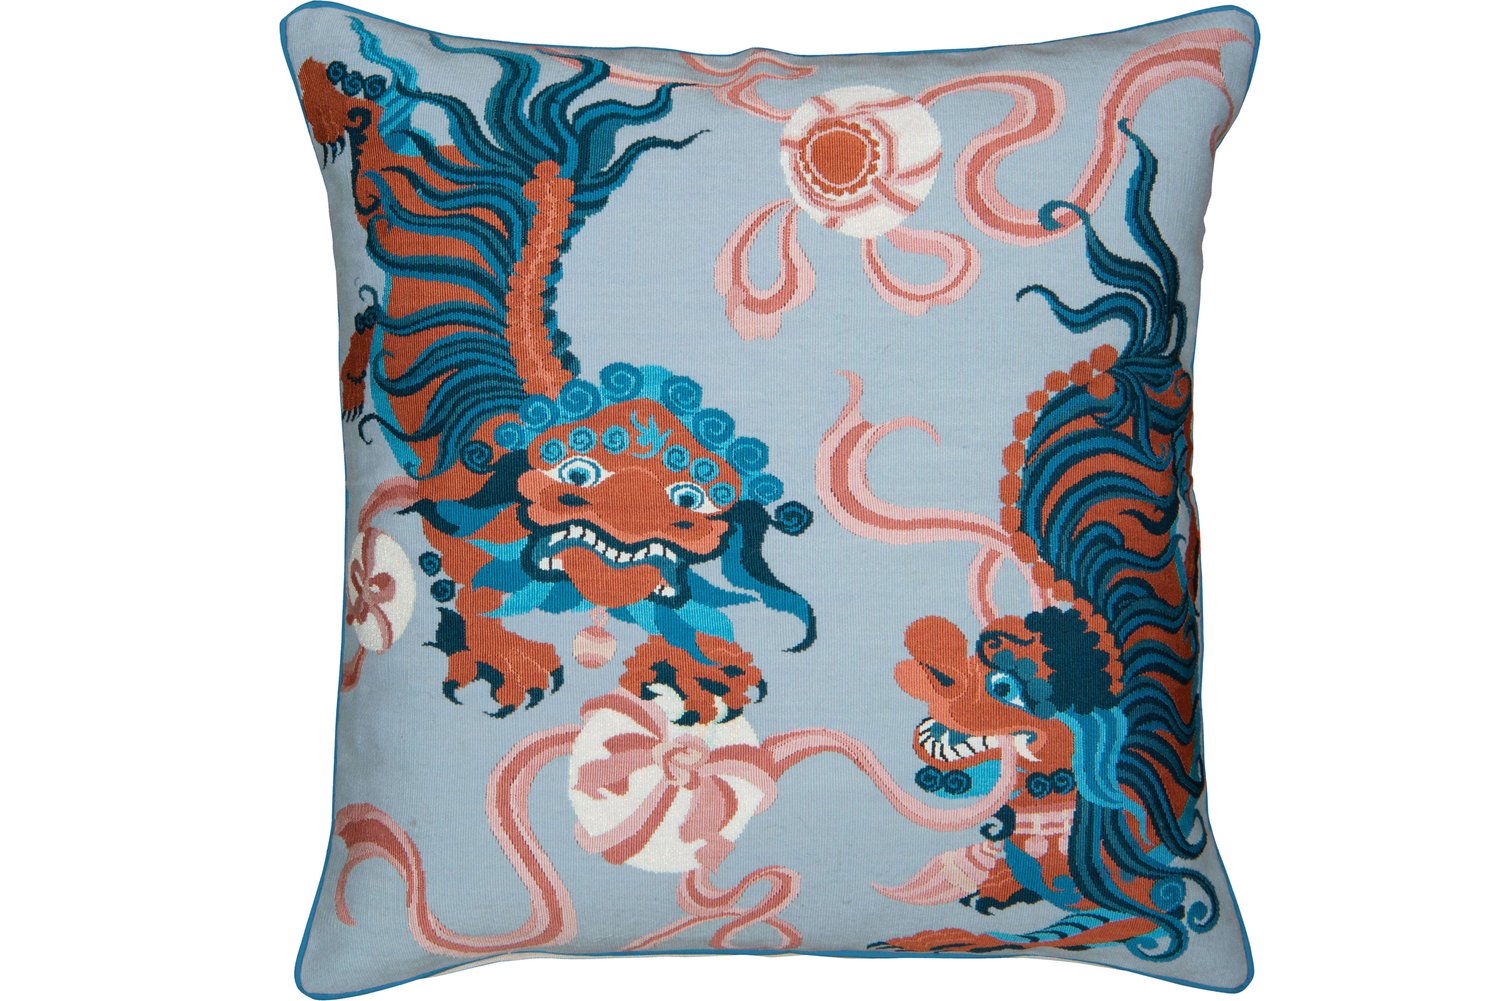 Throw pillow with a dragon patterned fabric.